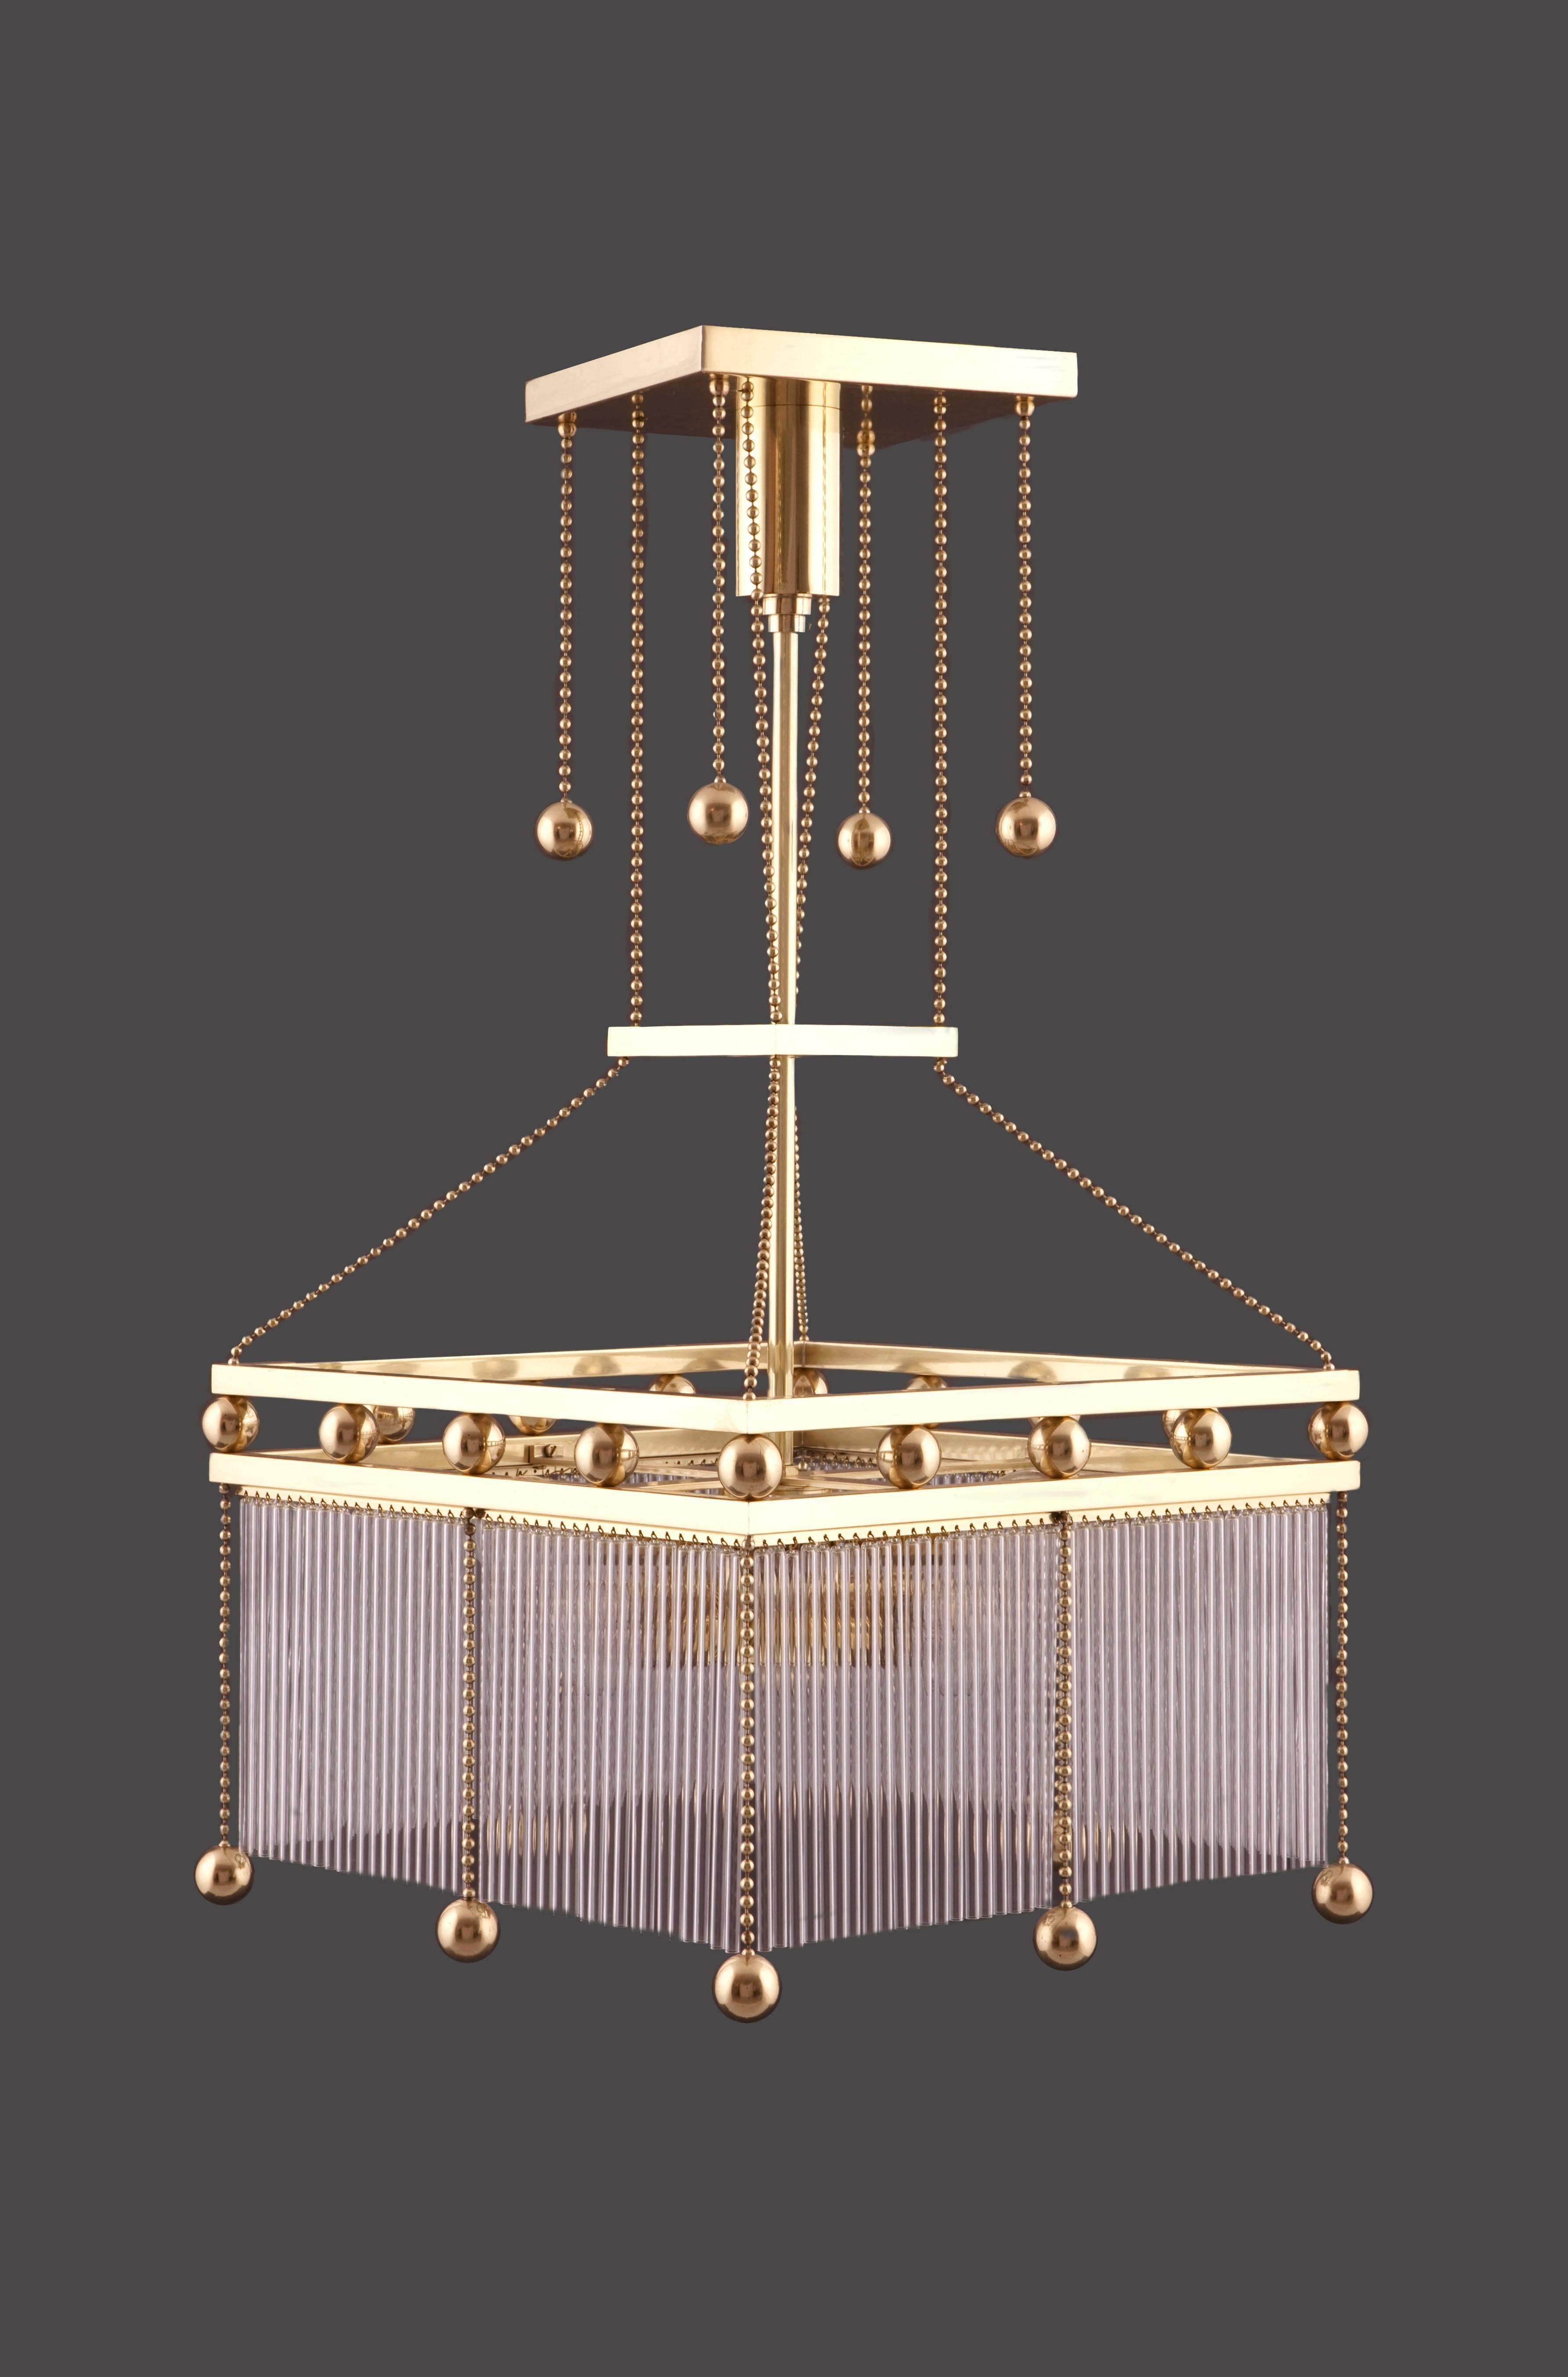 Viennese parlor chandelier. On the bottom we can mount a diffuser on request, to cover the visibility of the bulbs
Most components according to the UL regulations, with an additional charge we will UL-list and label our fixtures.